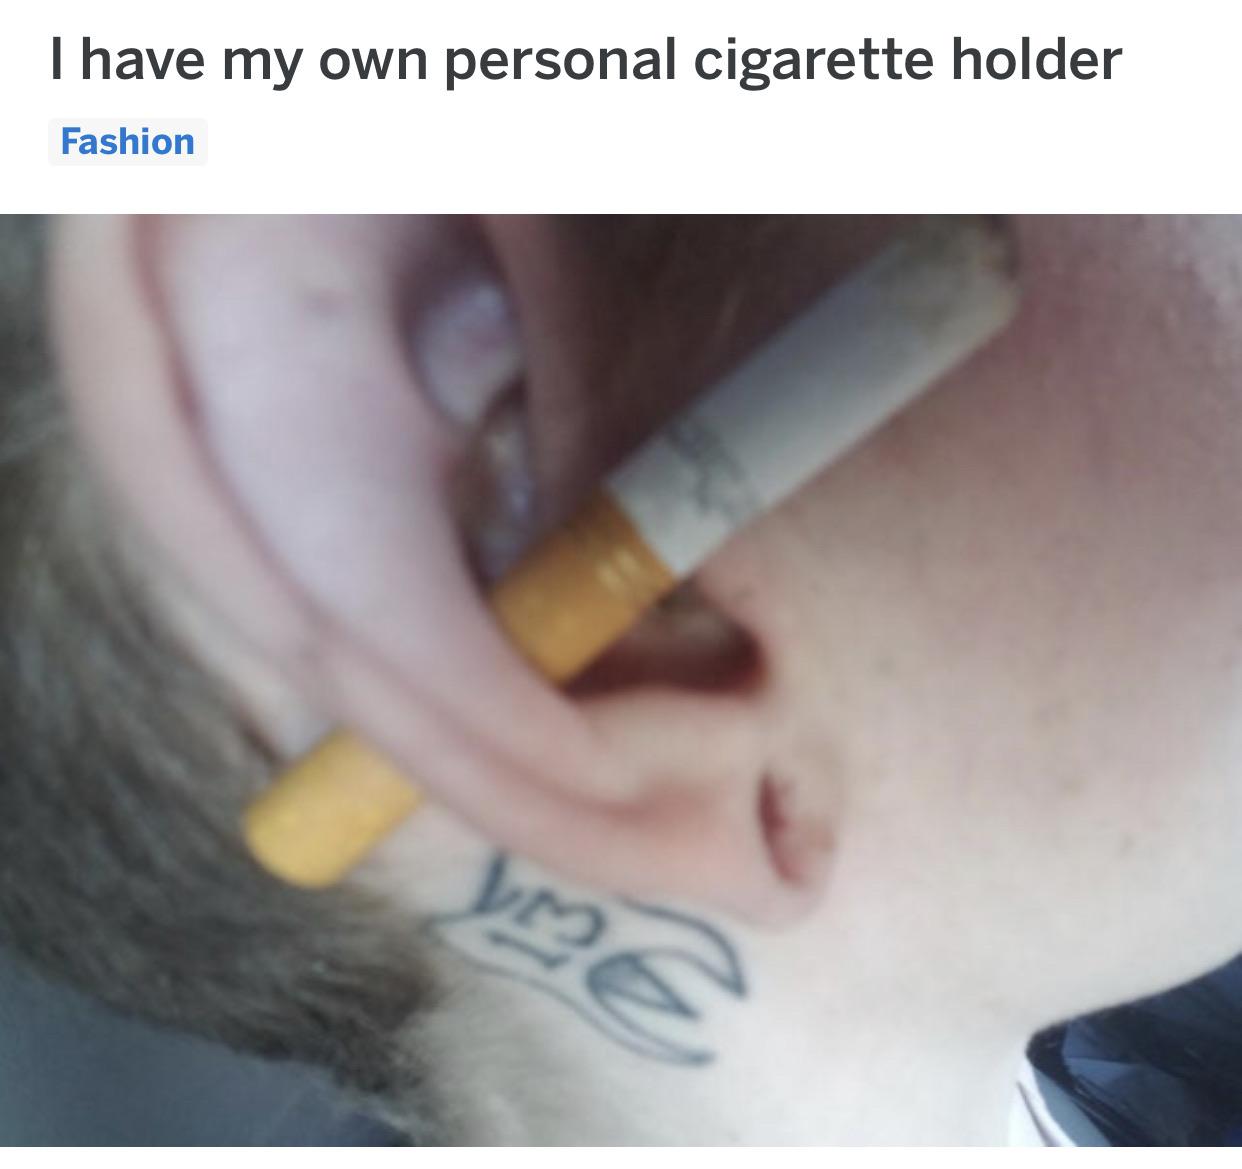 ear - I have my own personal cigarette holder Fashion